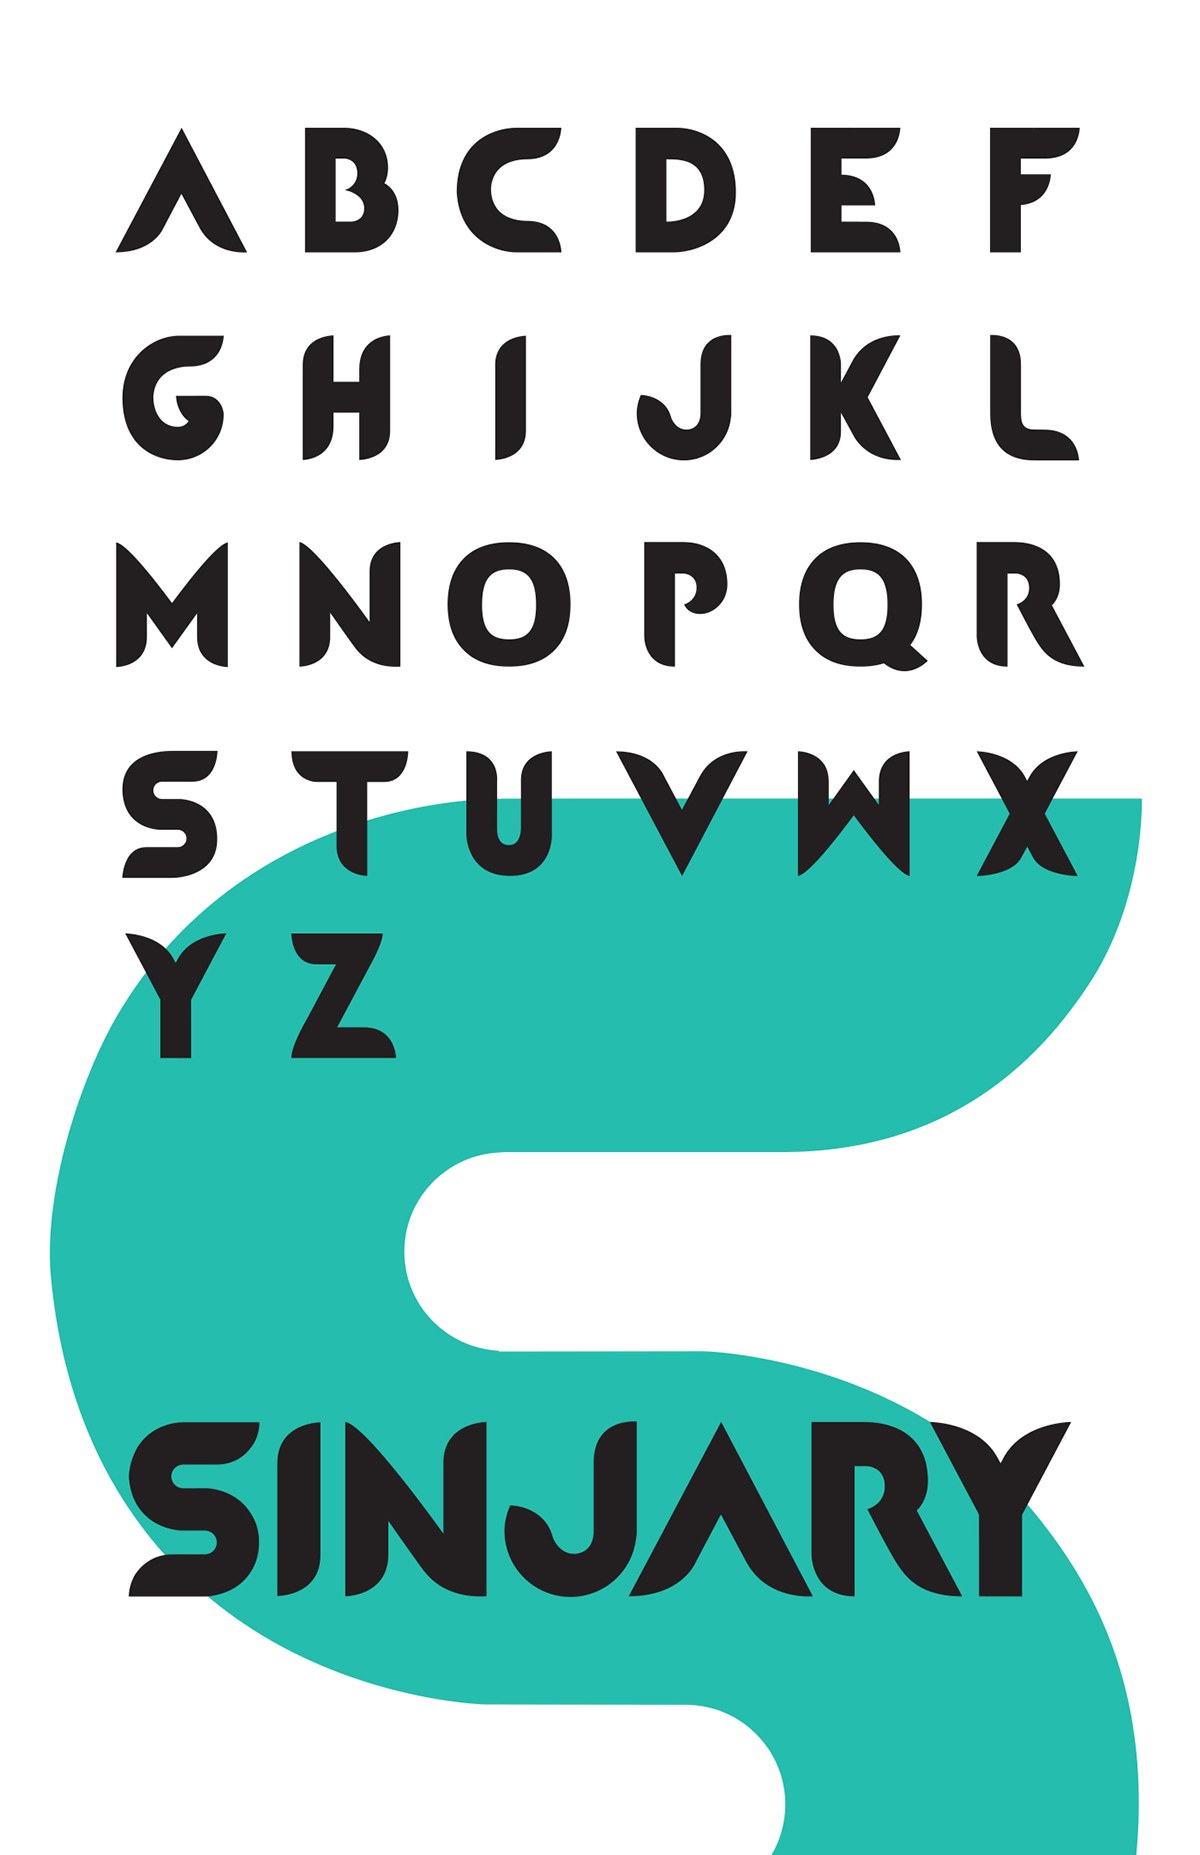 Sinjary Typeface Kurdistan Maher fonts New Fronts curve Rounded Edges bold typeface bold type